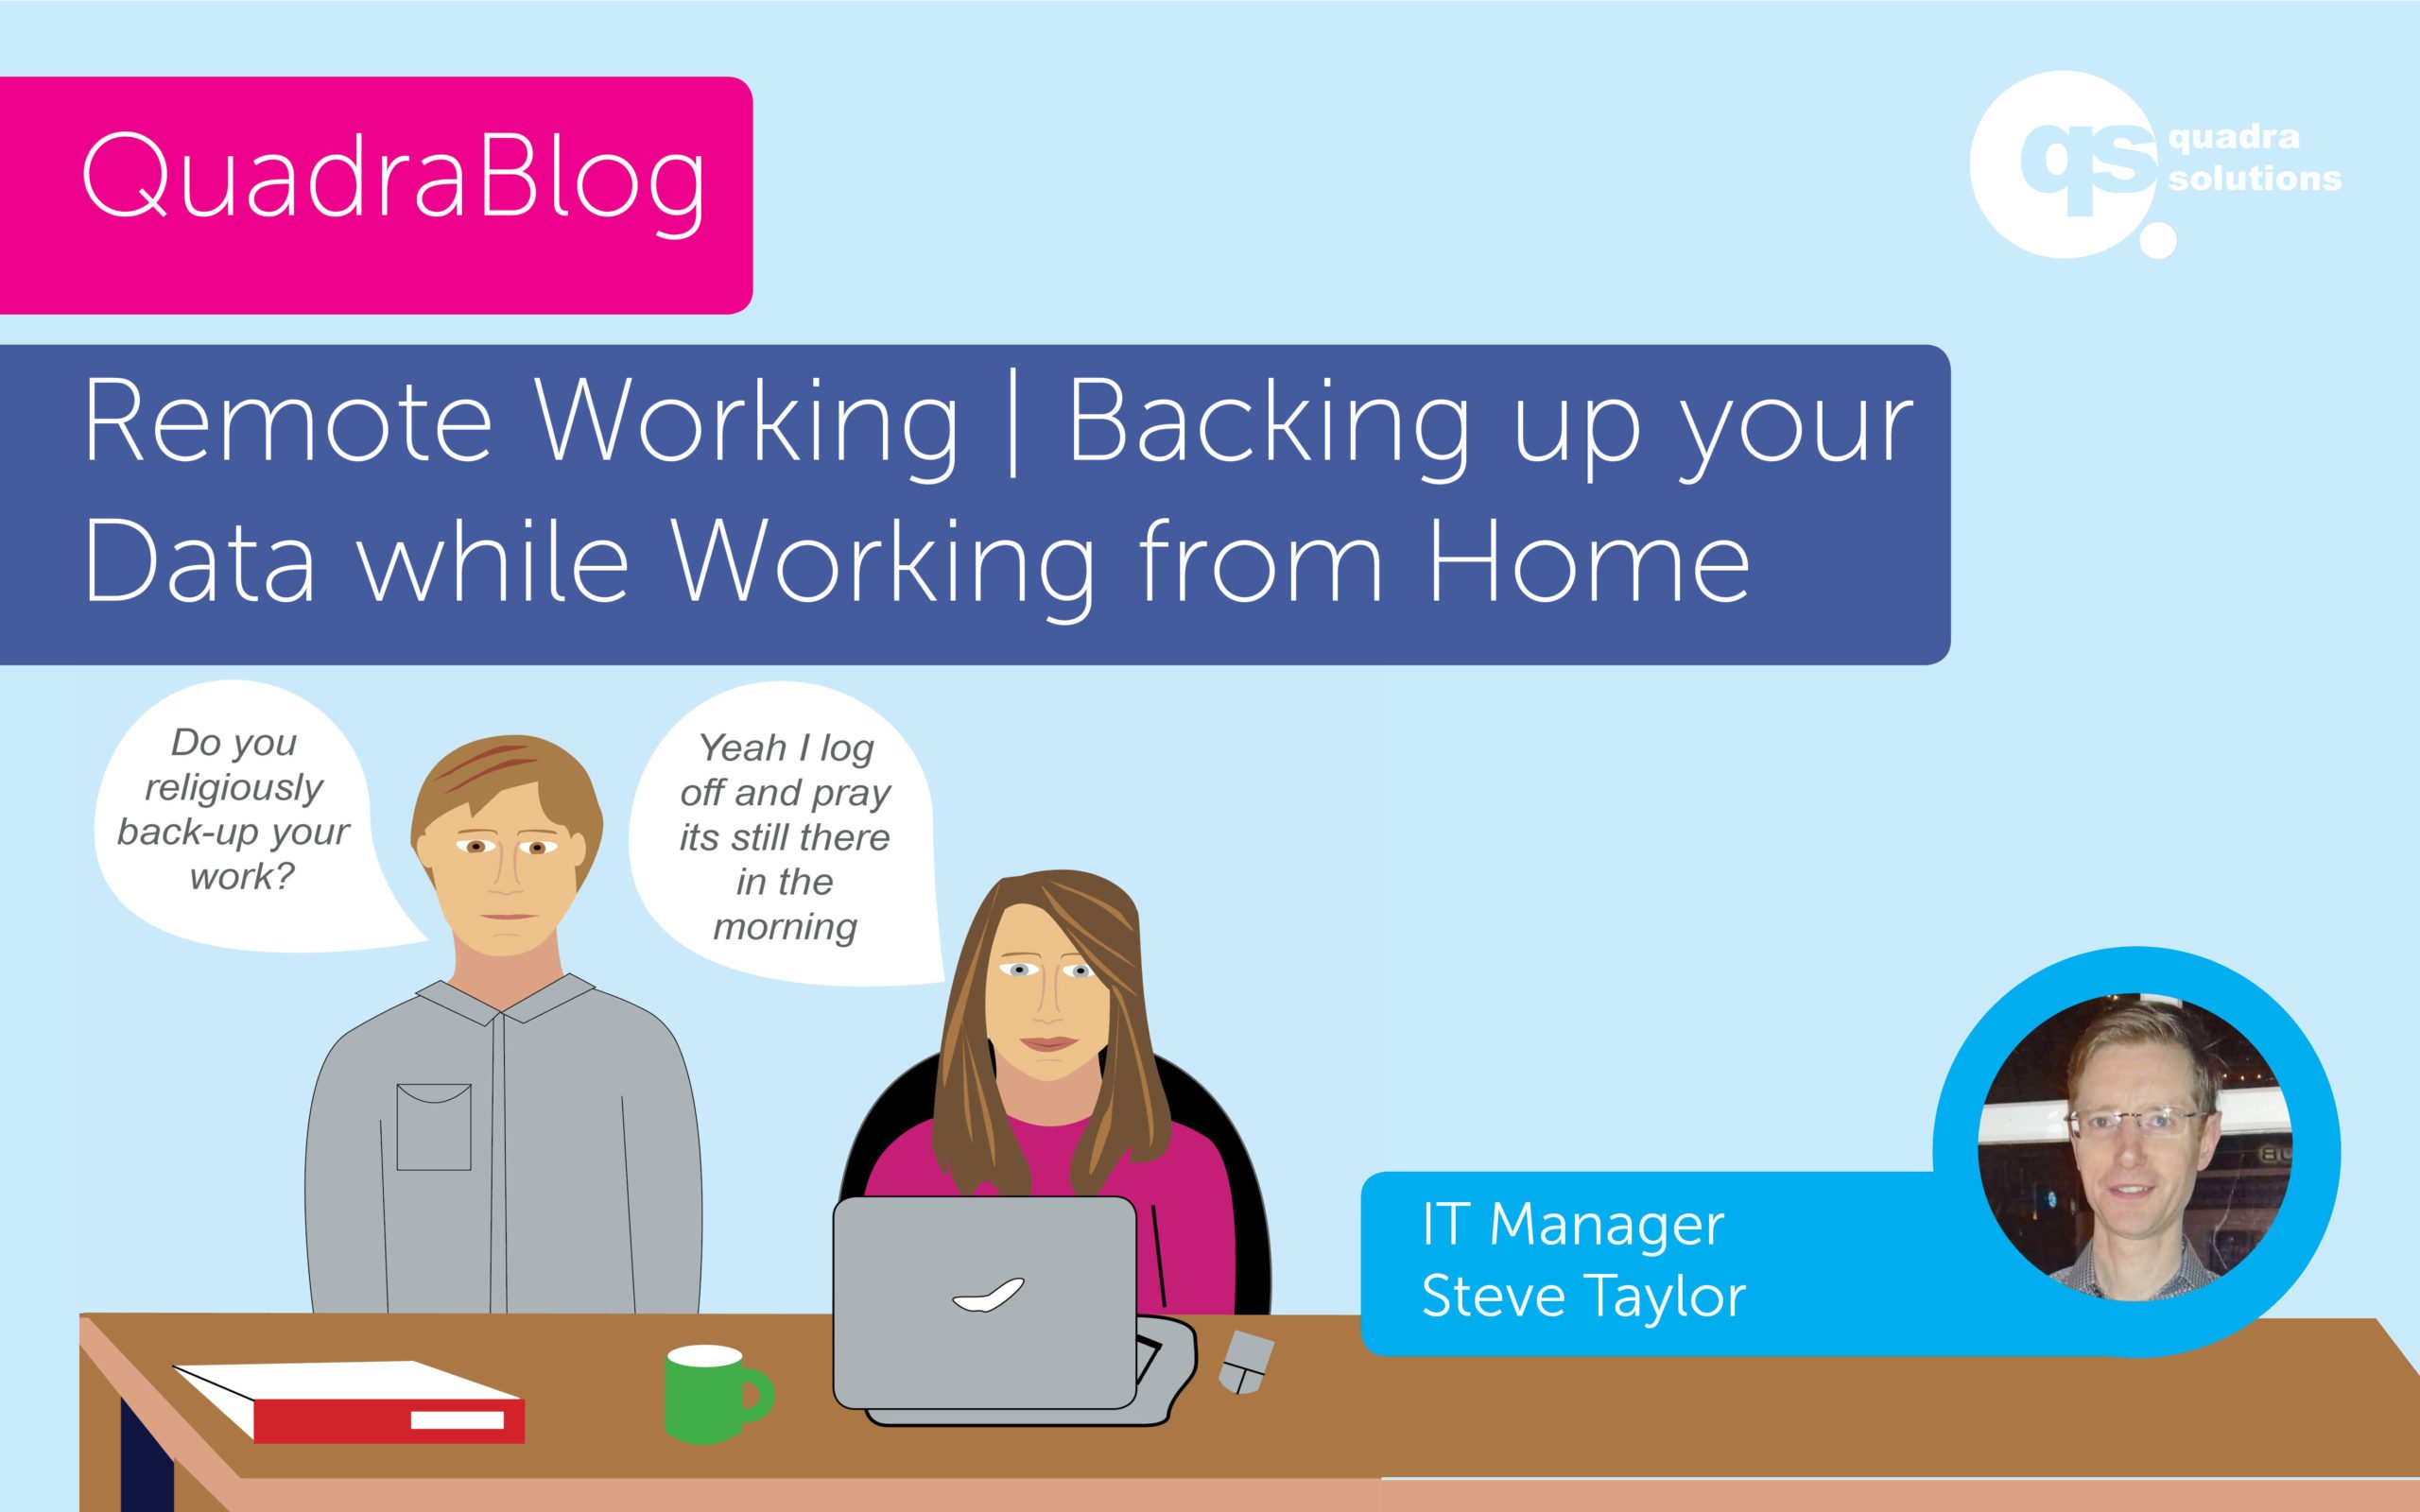 Remote Working | Backing up your data while working from home